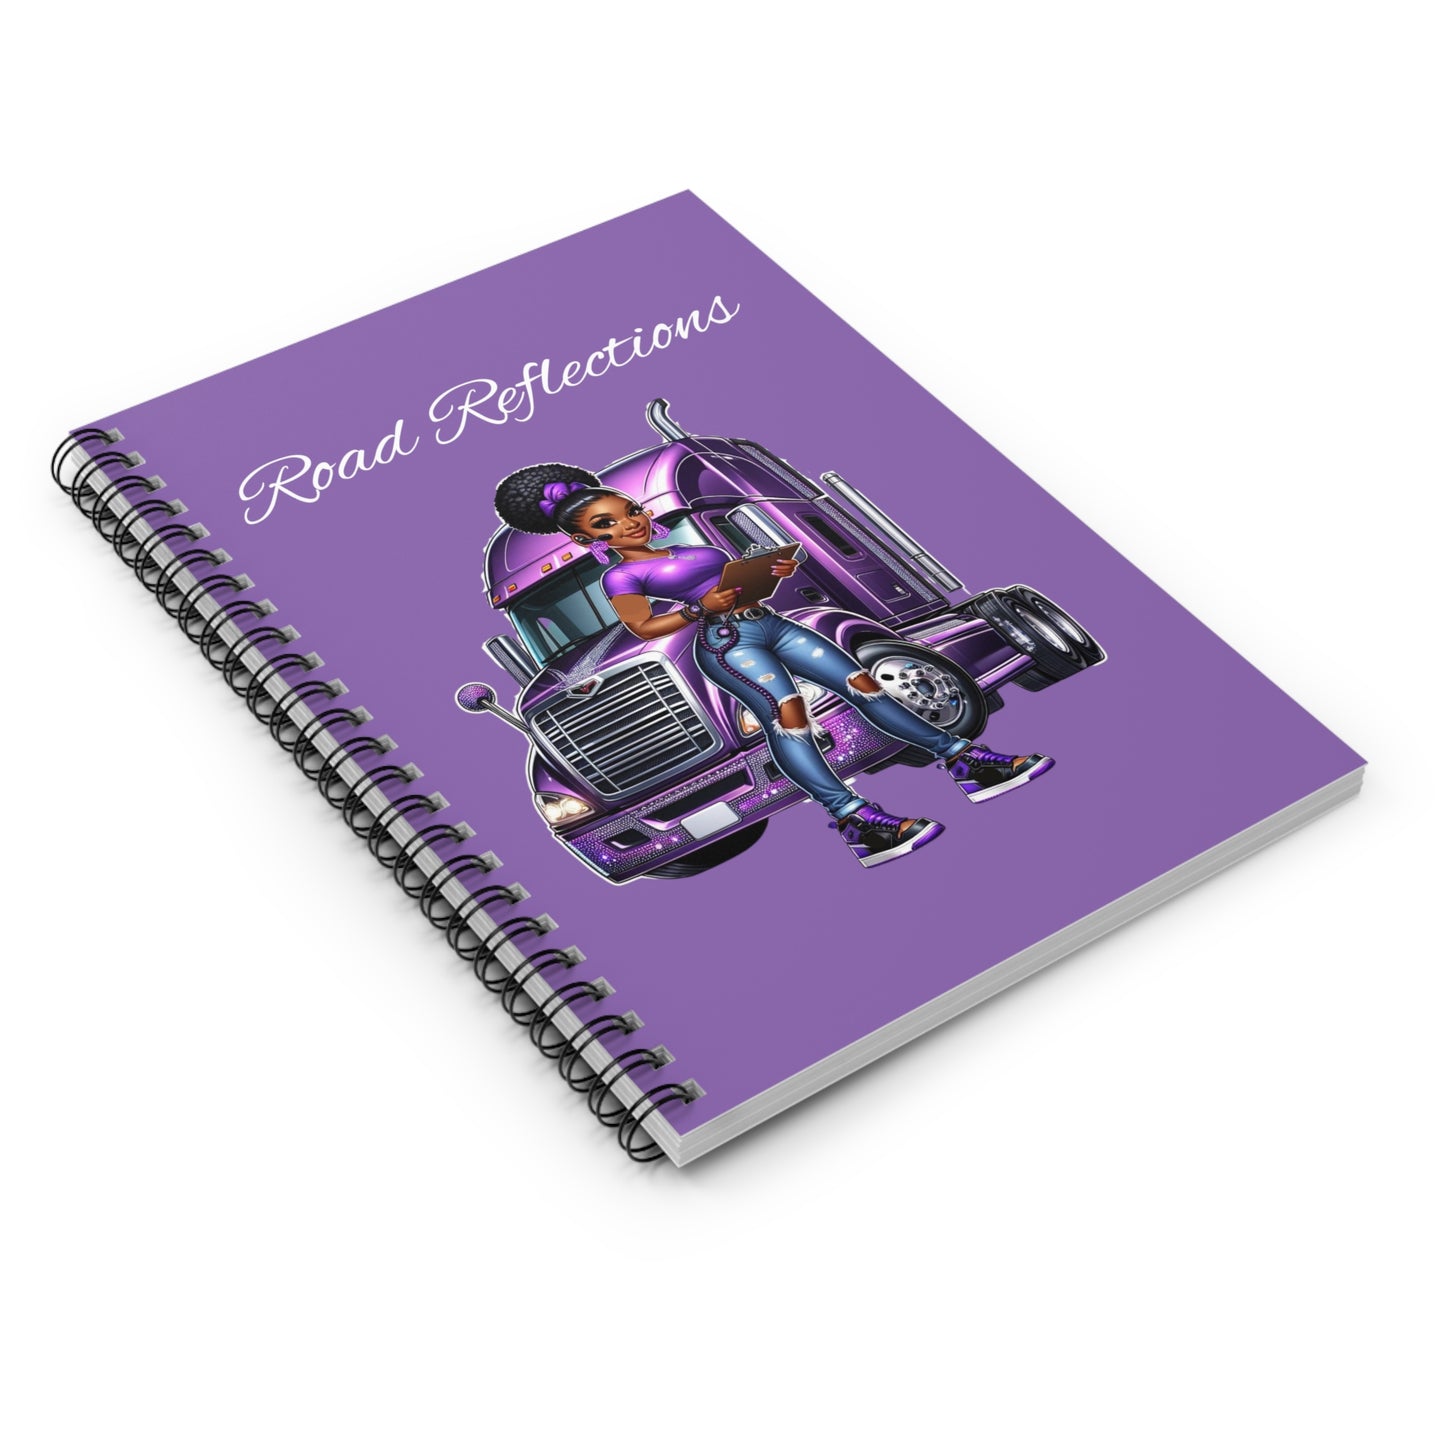 Purple "Road Reflections" Spiral Notebook